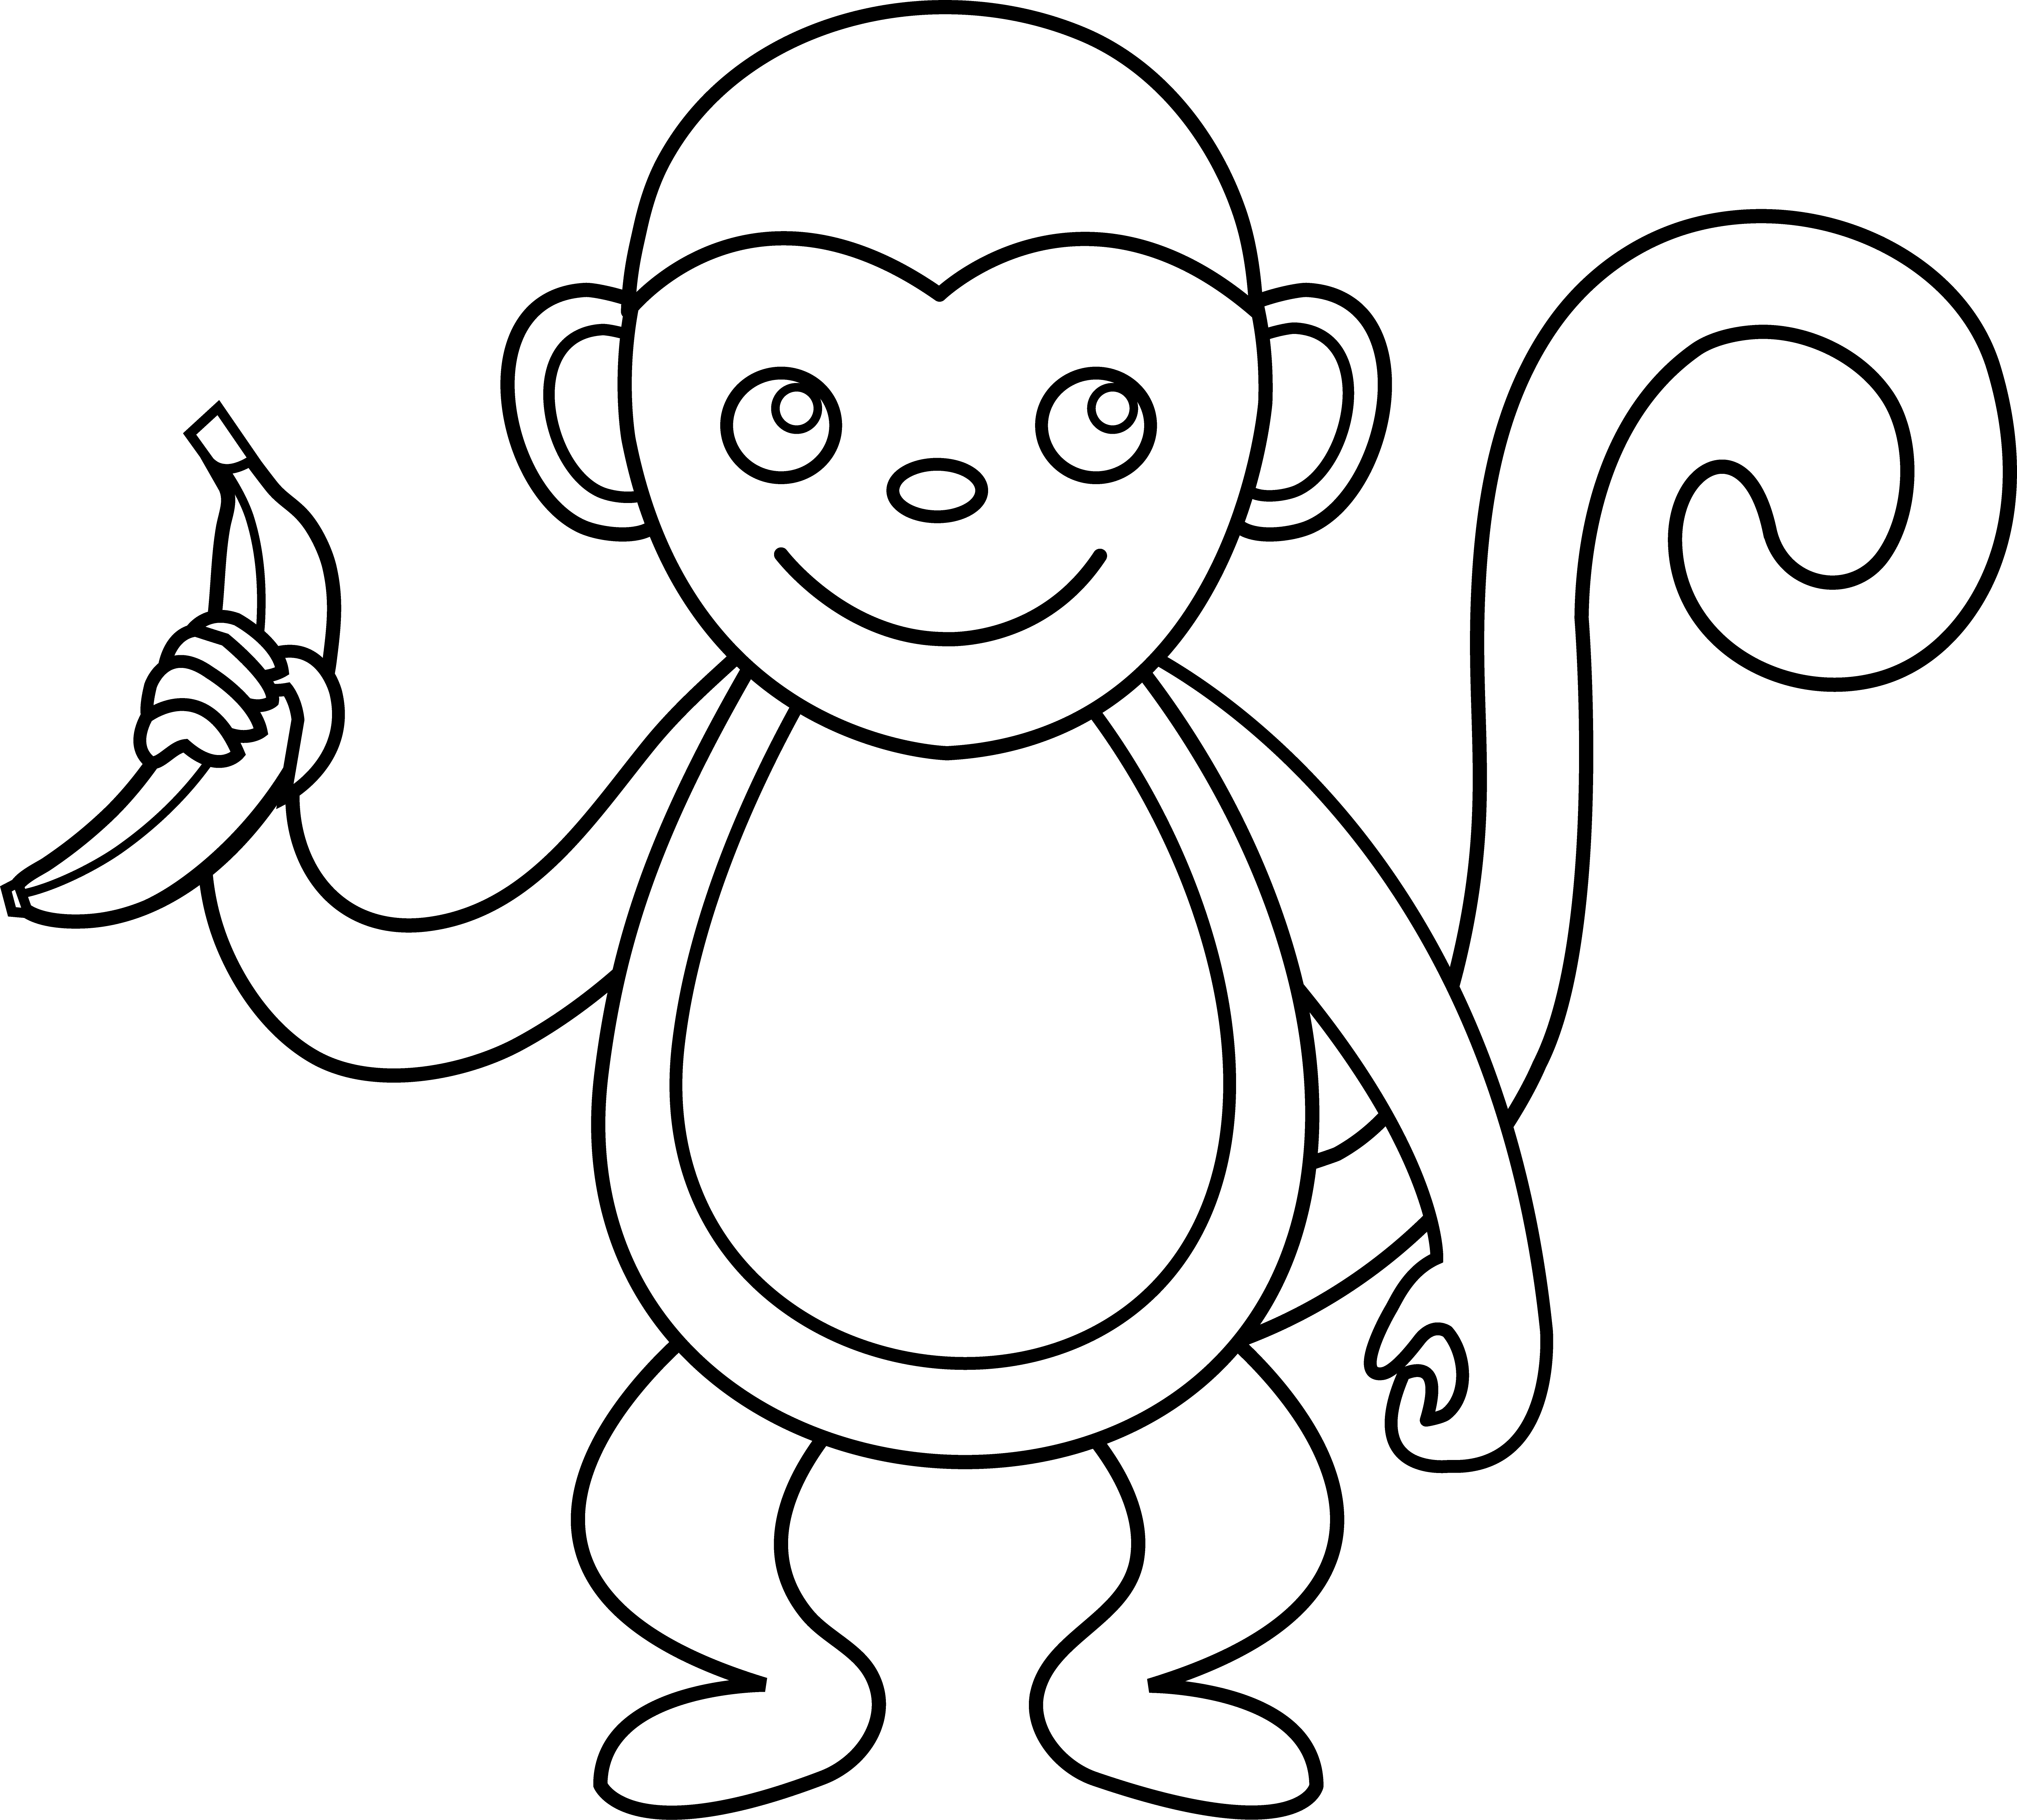 Free Outline Of A Monkey, Download Free Outline Of A Monkey png images